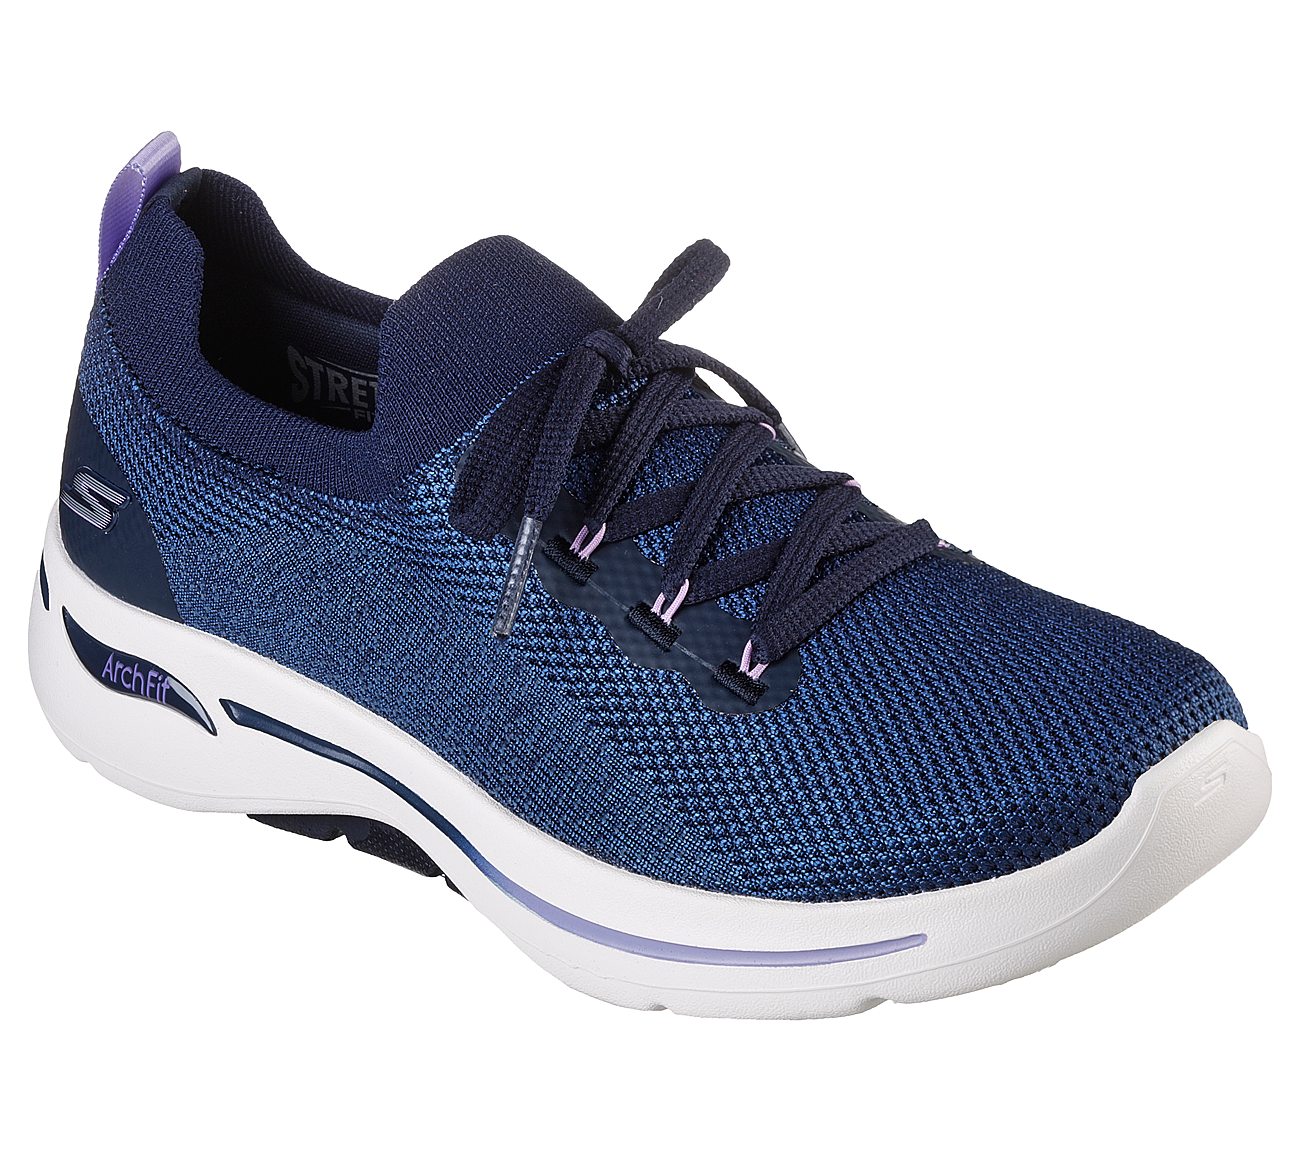 Skechers Navy/Light Violet Go Walk Arch Fit Clancy Womens Walking Shoes ...